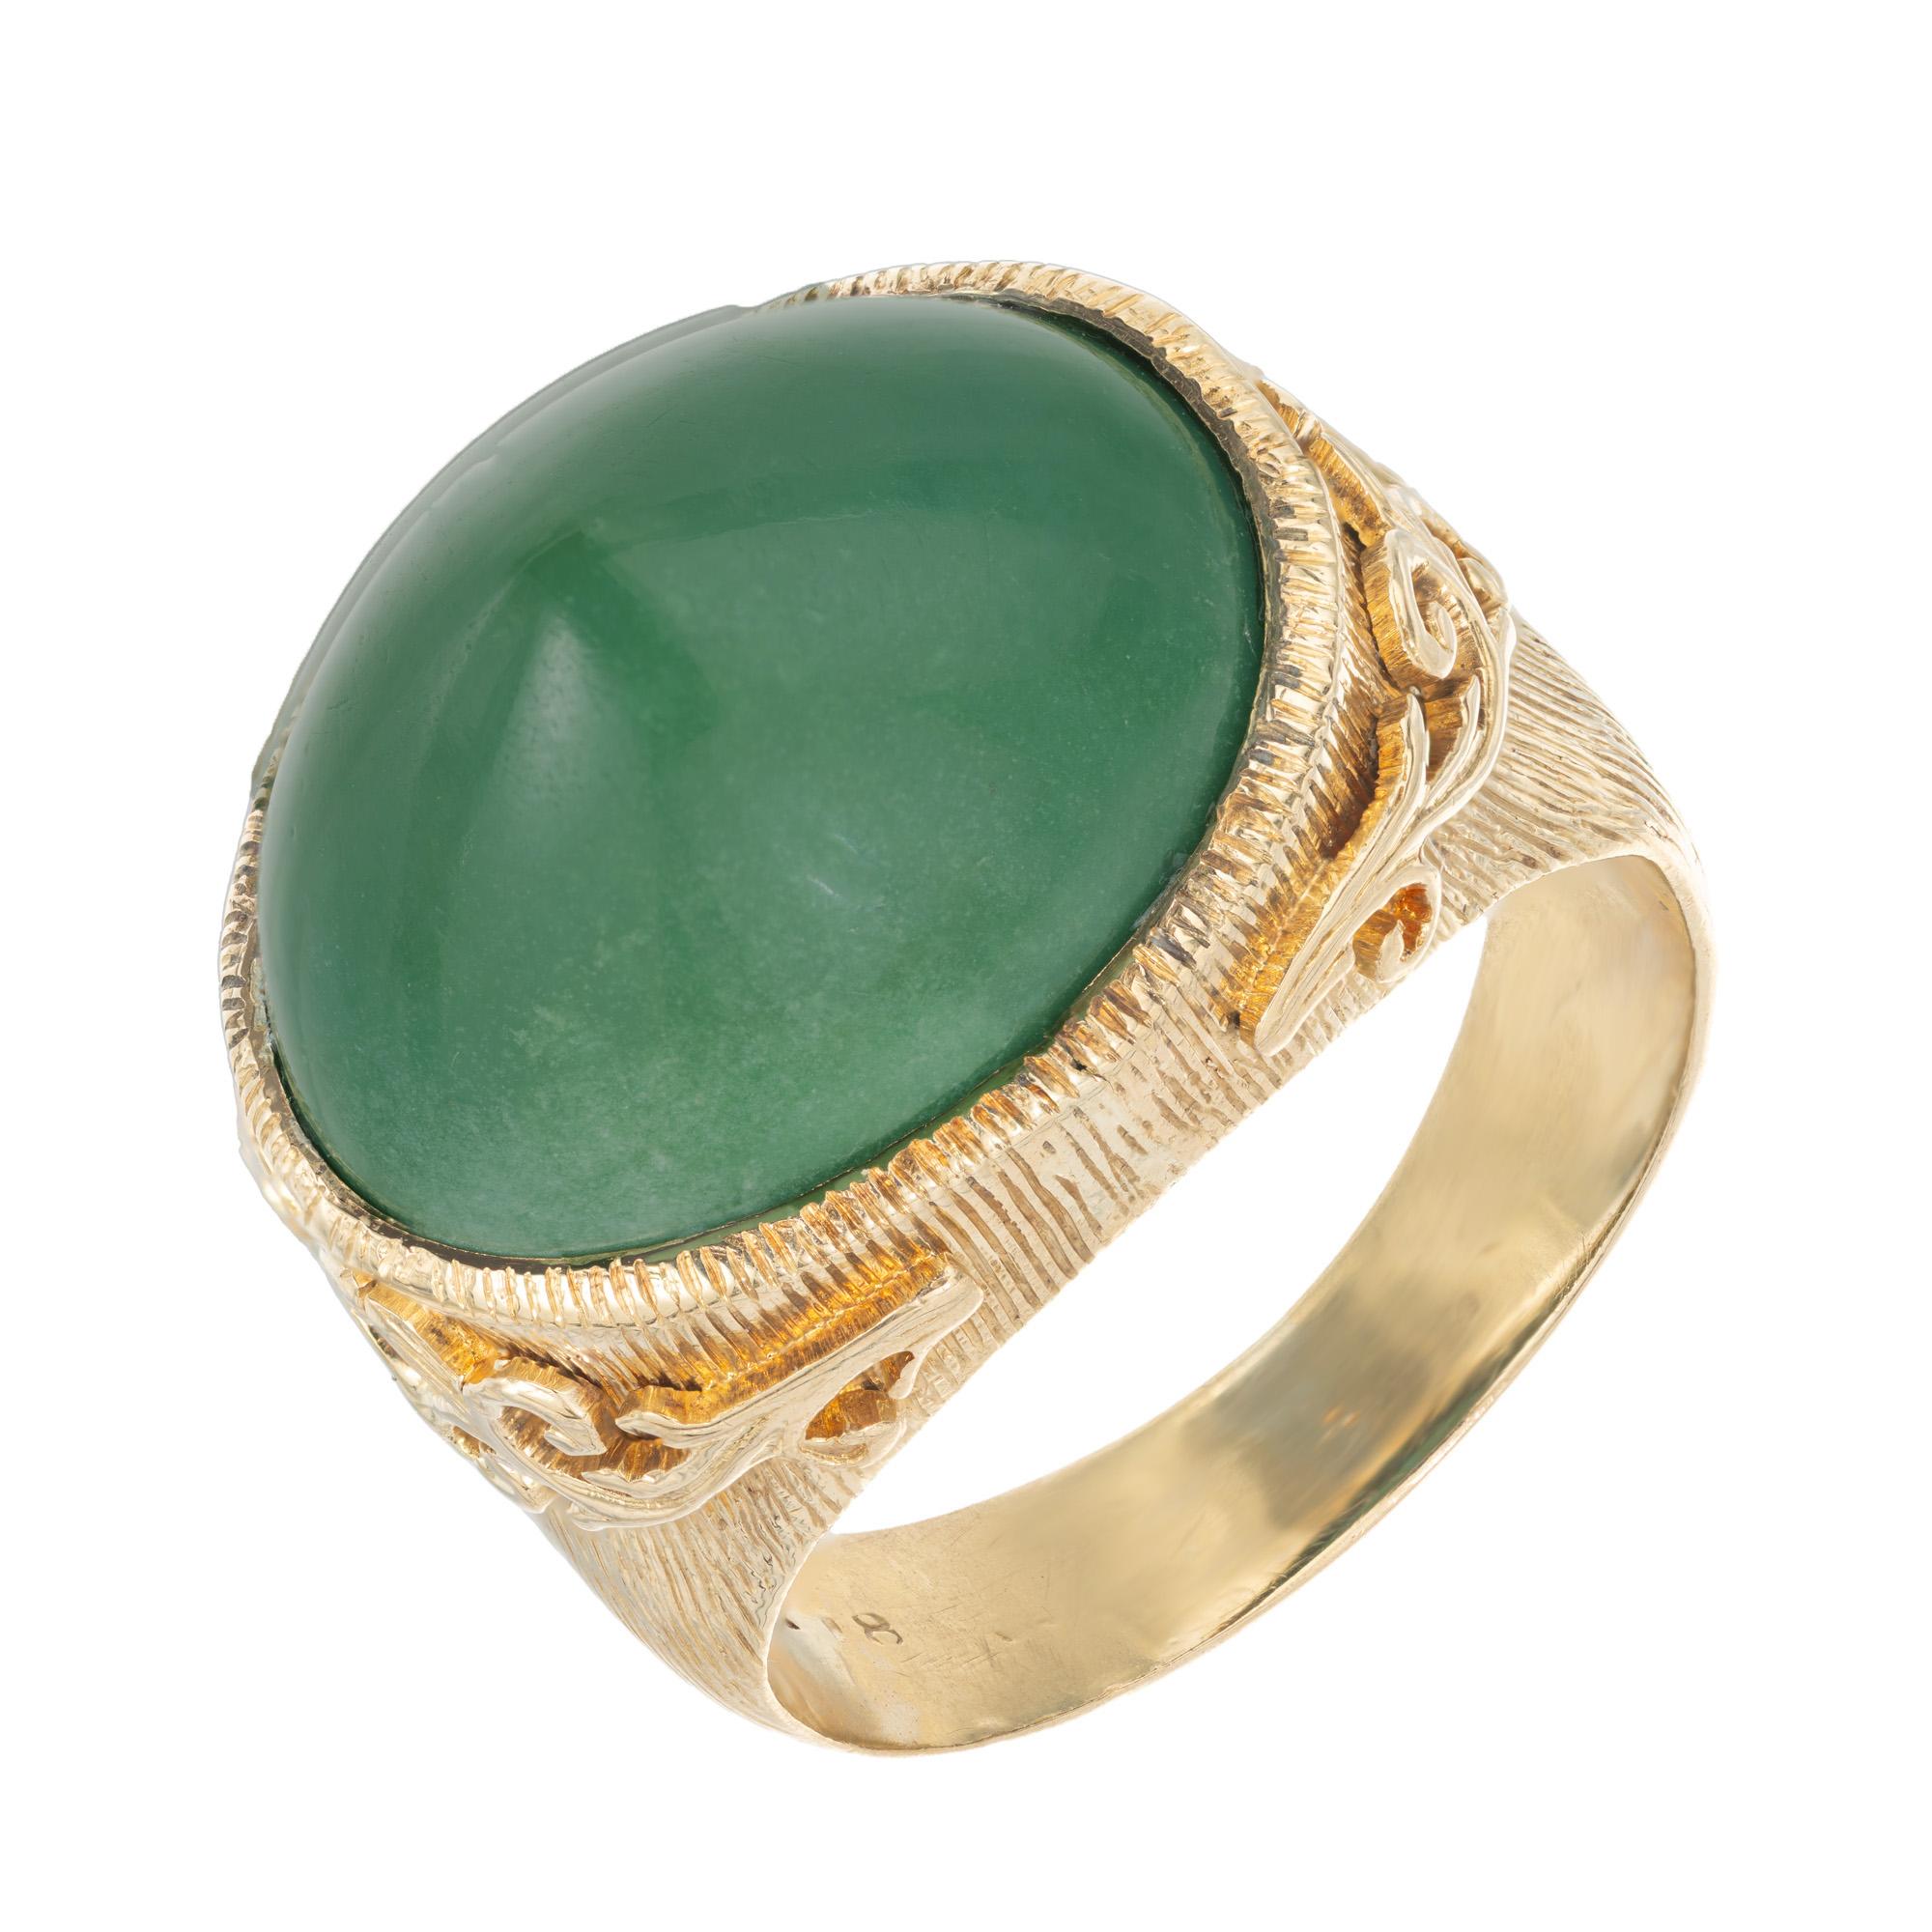 Sugar loaf style Turquoise gold ring. GIA certified cabochon high dome sugar loaf style turquoise, mounted in a textured bezel setting which was hand crafted in the early 1900's. The GIA has certified this as natural green turquoise. 

1 oval